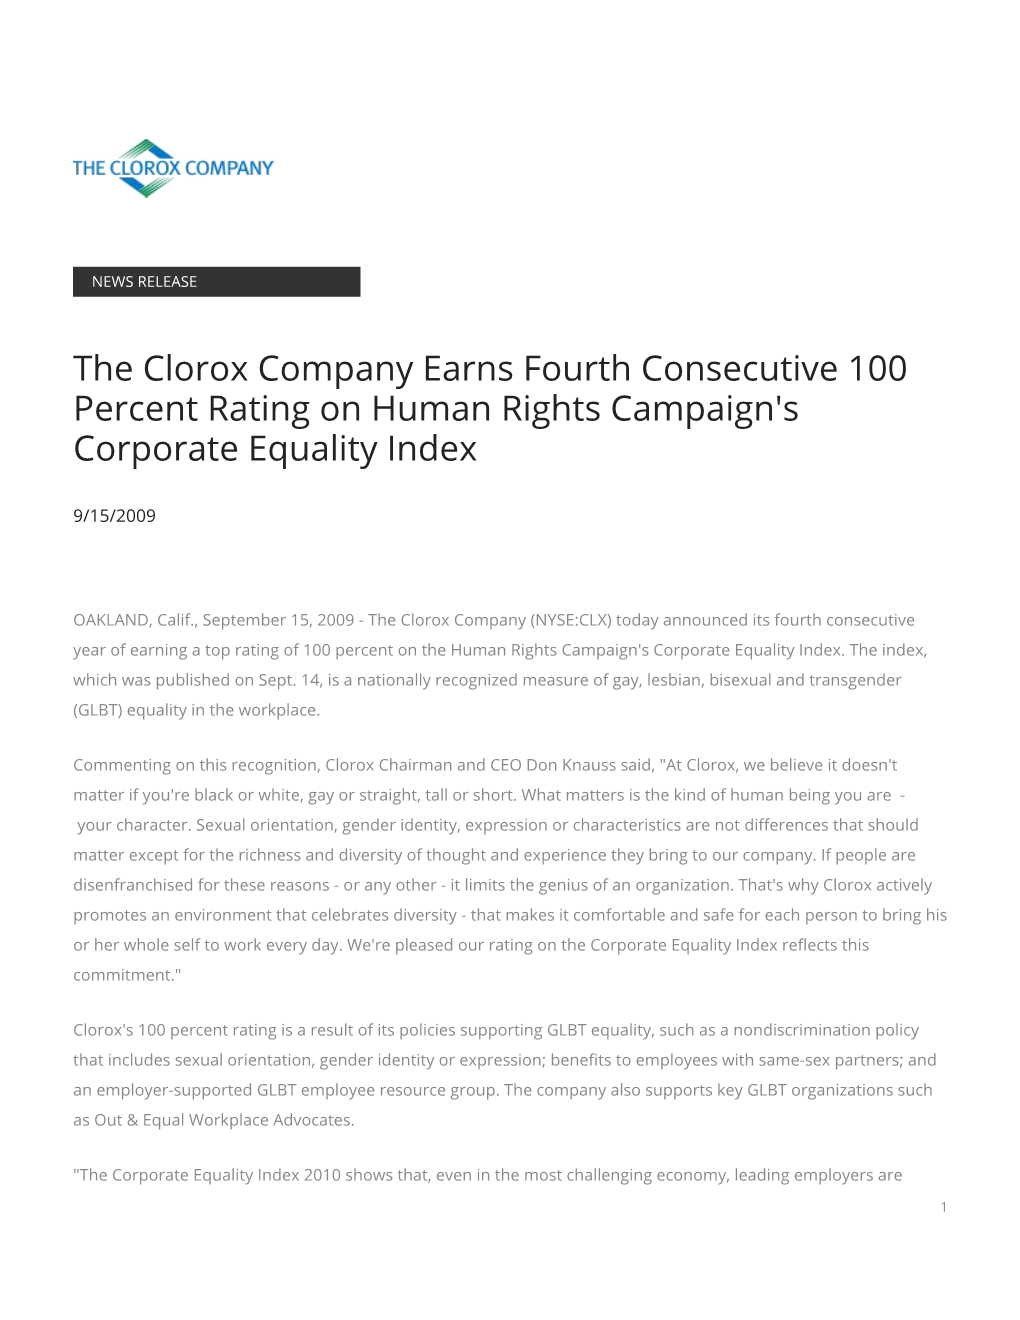 The Clorox Company Earns Fourth Consecutive 100 Percent Rating on Human Rights Campaign's Corporate Equality Index